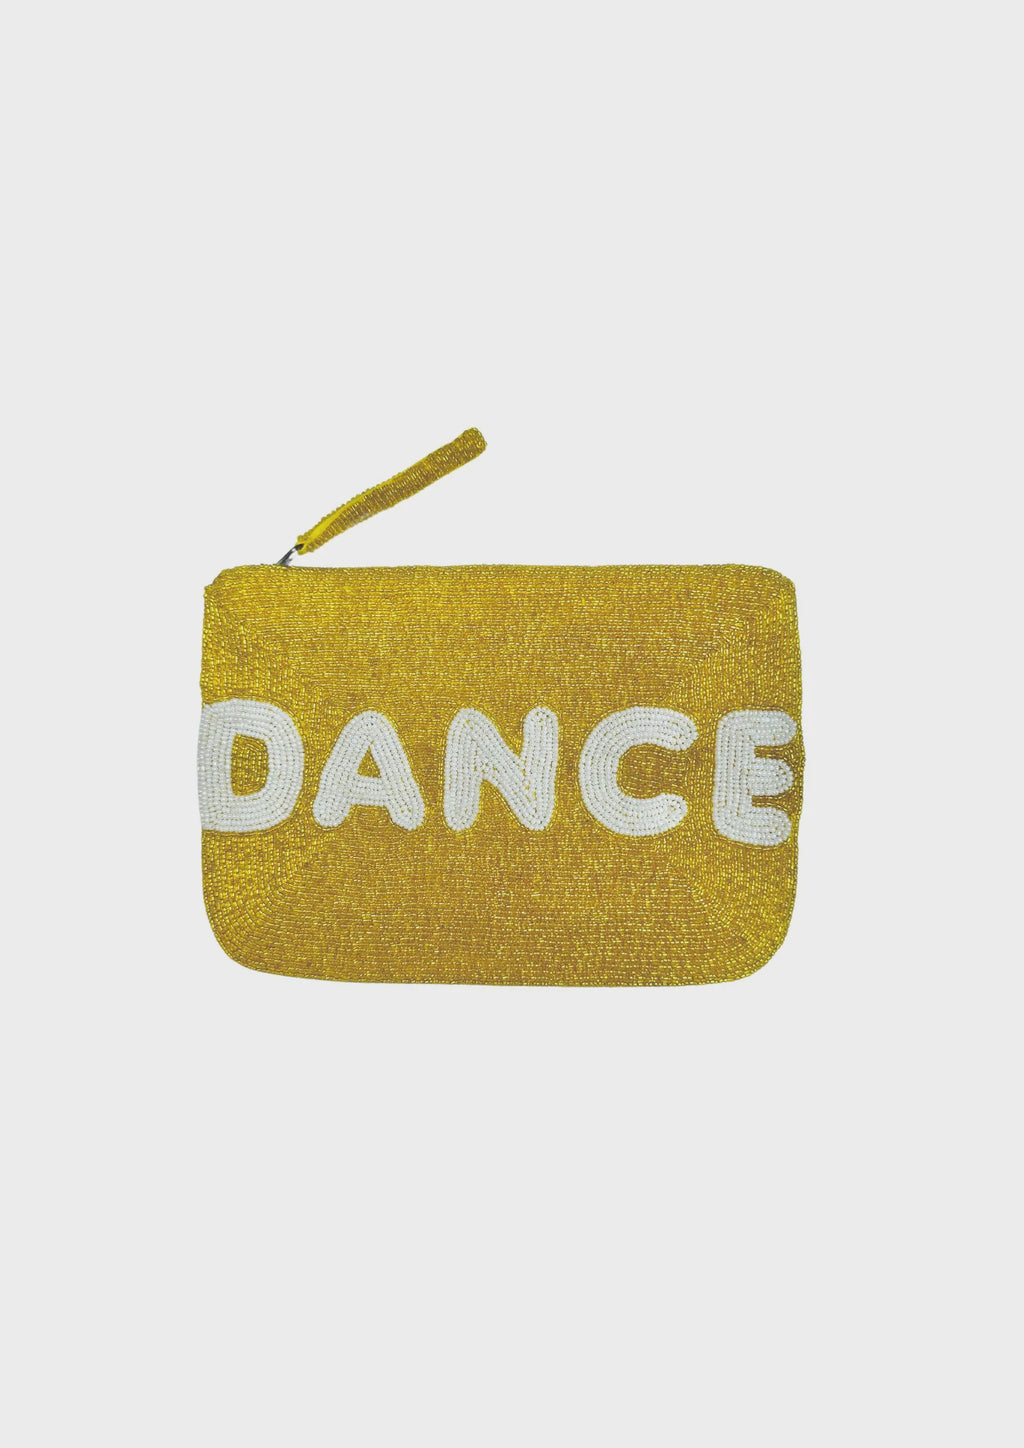 DANCE BEADED CLUTCH - GOLD / WHITE - THE JACKSONS